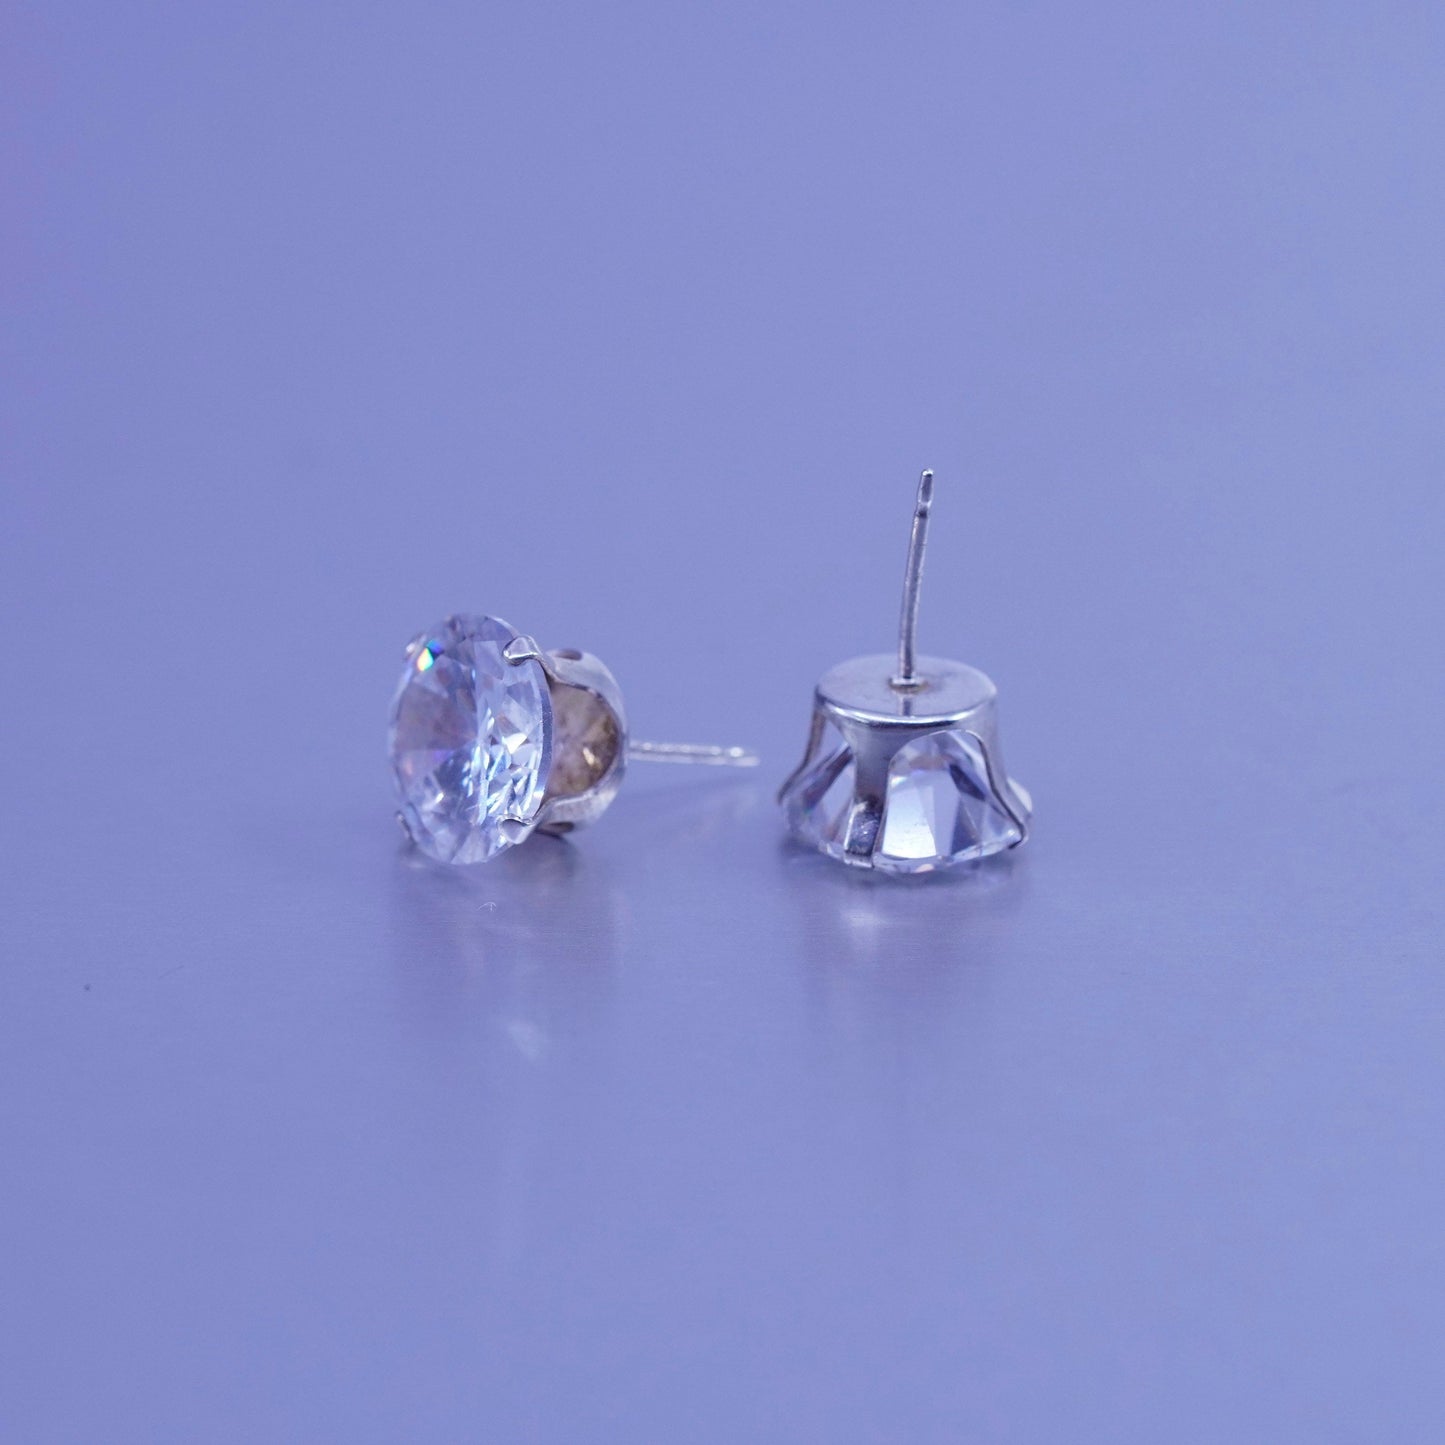 10mm Vintage Sterling 925 silver earrings, studs with round Cz inlay,